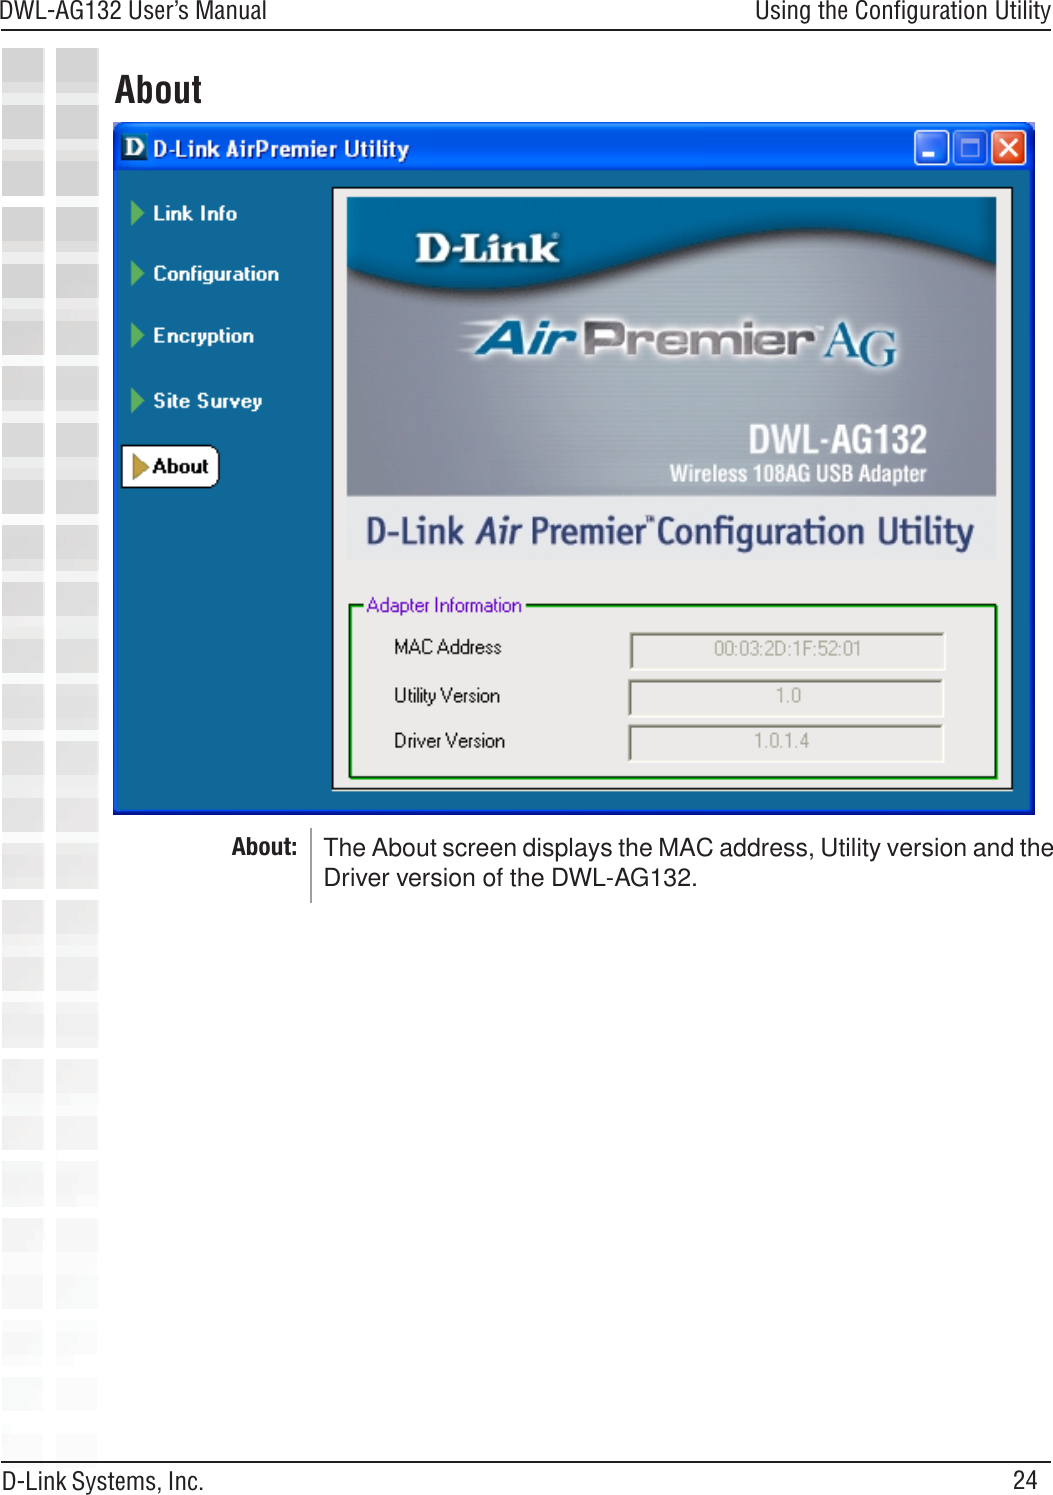 24DWL-AG132 User’s ManualD-Link Systems, Inc.Using the Configuration UtilityAbout: The About screen displays the MAC address, Utility version and theDriver version of the DWL-AG132.About